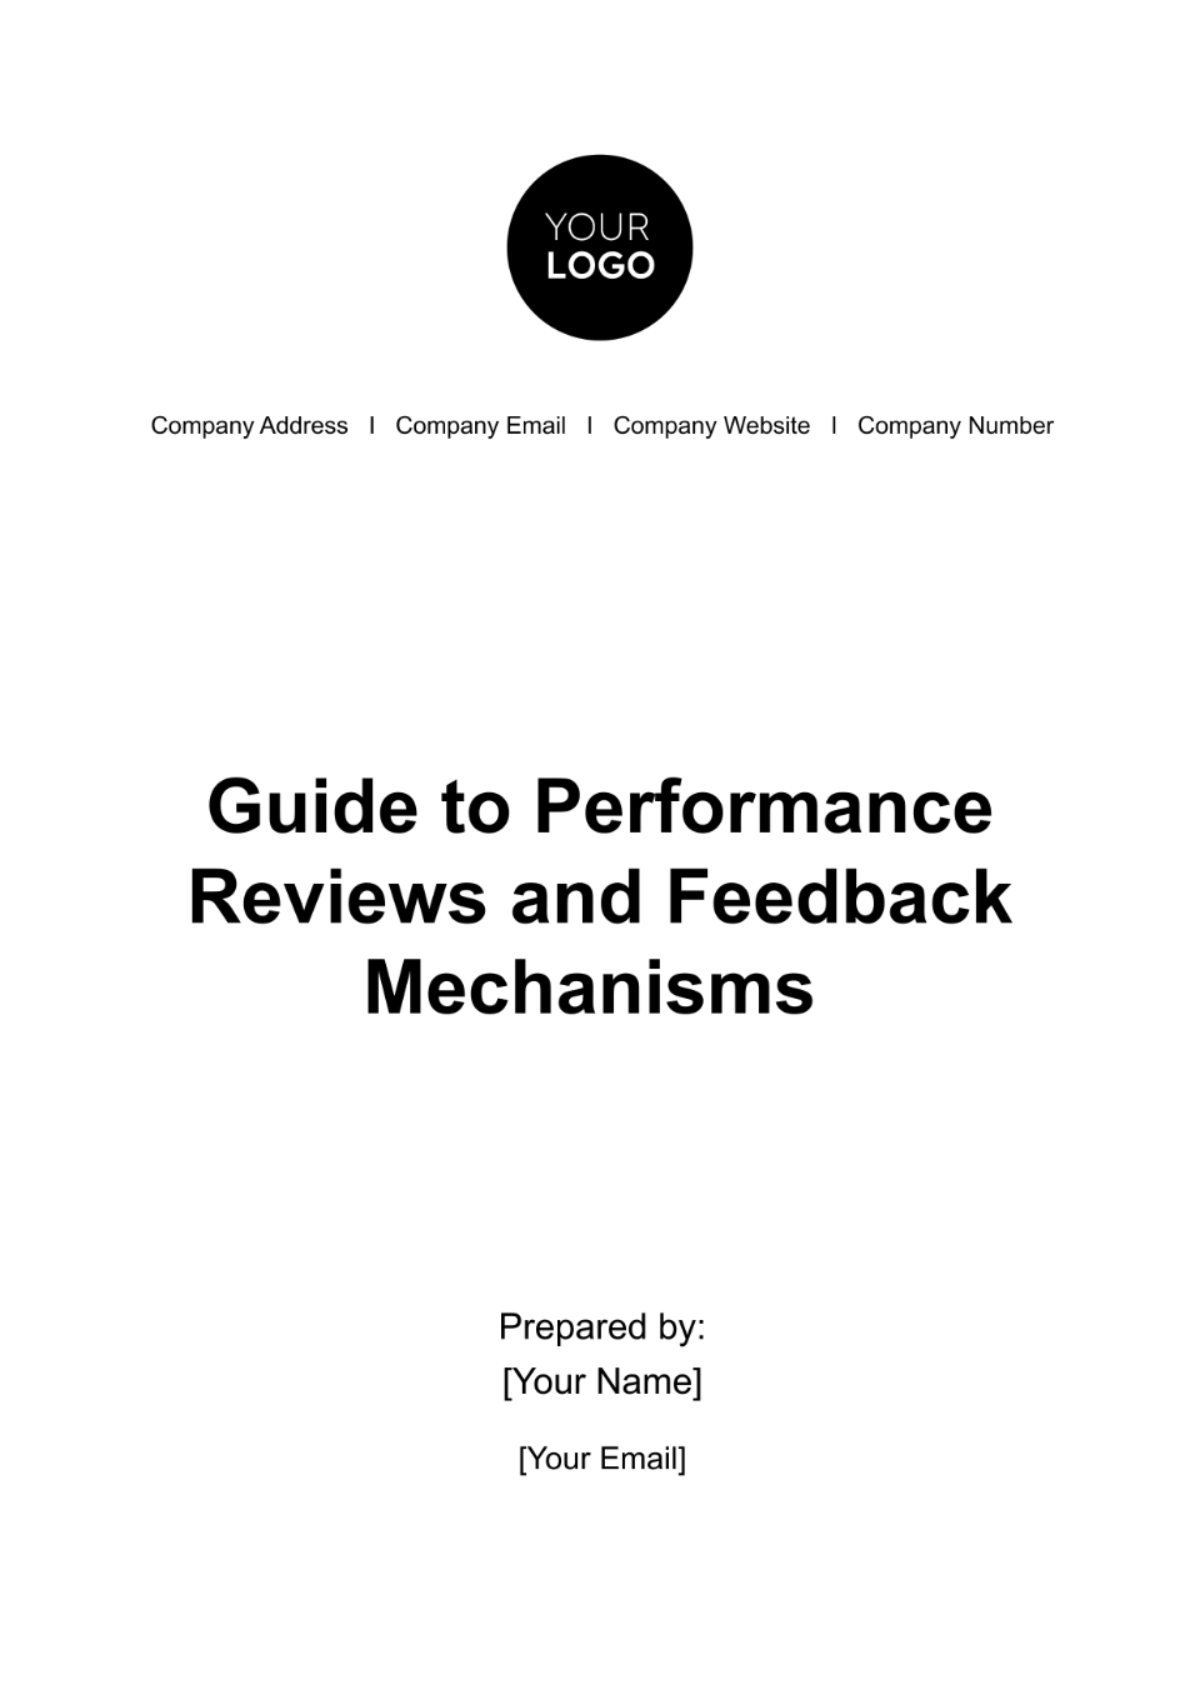 Free Guide to Performance Reviews and Feedback Mechanisms HR Template